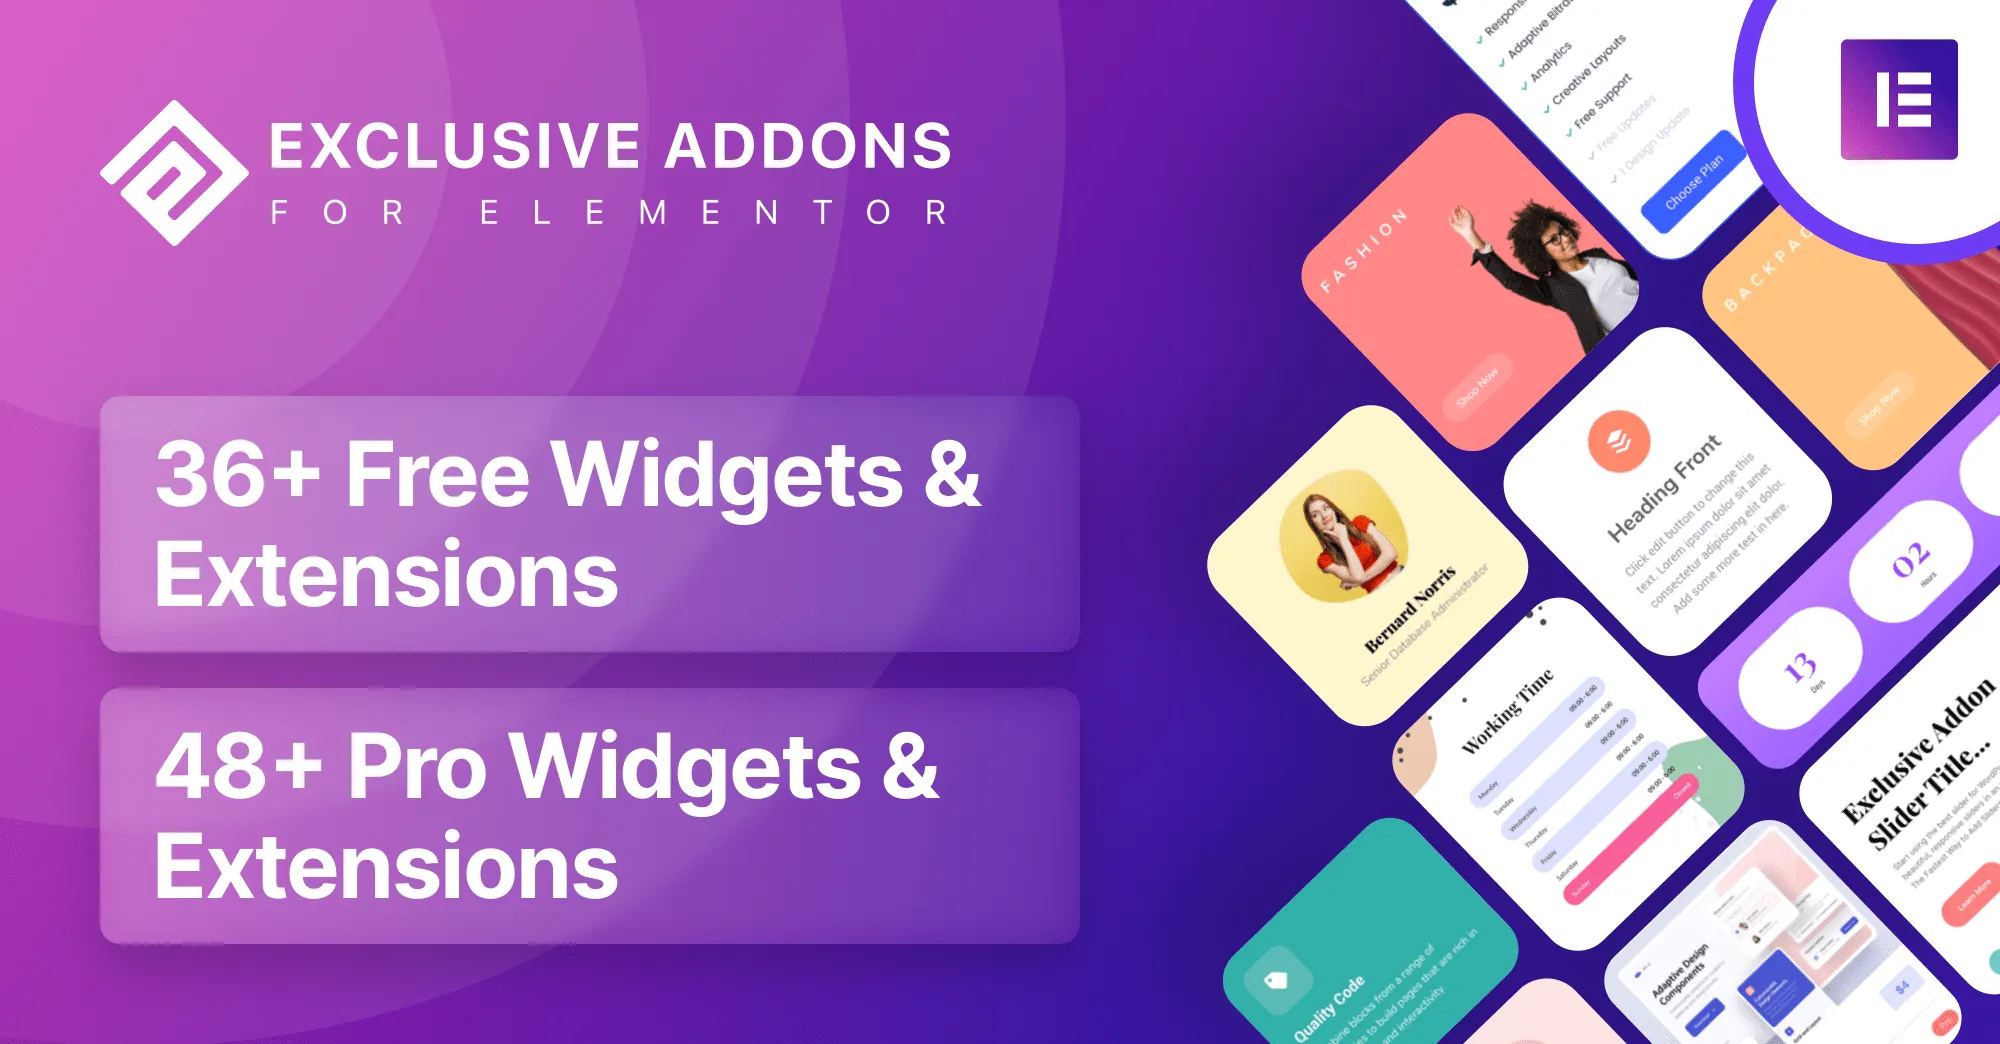 Exclusive Addons Pro for Elementor v1.5.9.1 nulled